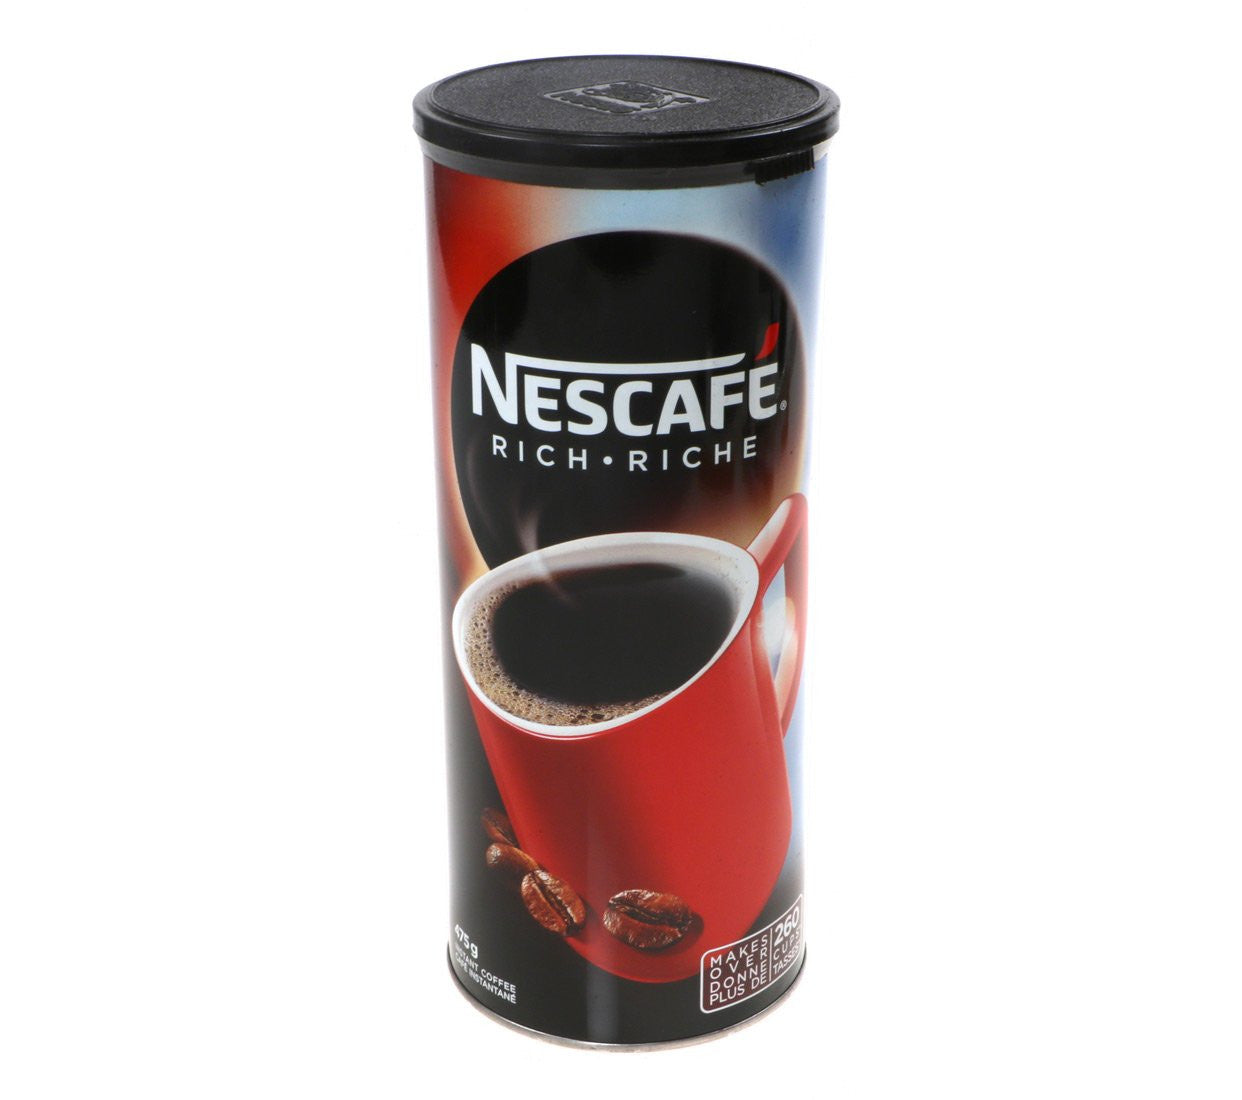 Nescafe Rich Instant Coffee Tin, 475g/16oz. - {Imported from Canada}